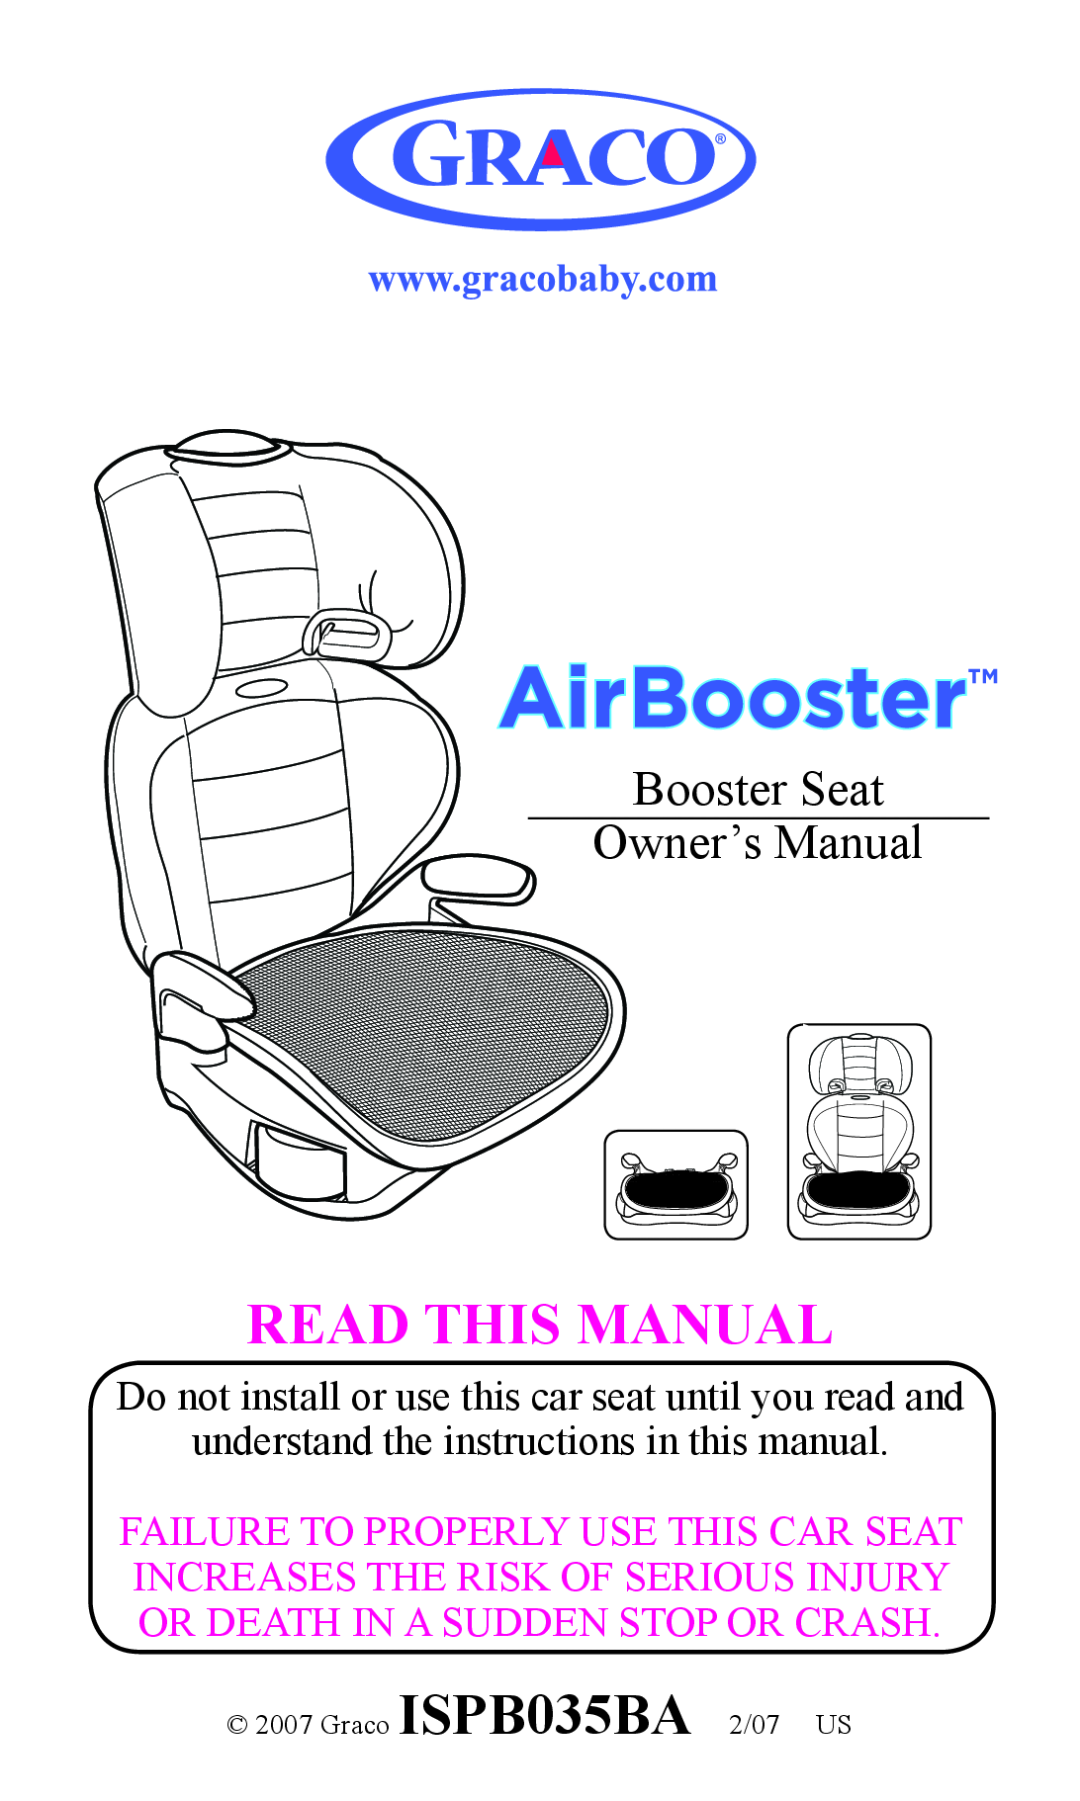 Graco owner manual Read This Manual, Booster Seat Owner’s Manual, understand the instructions in this manual 